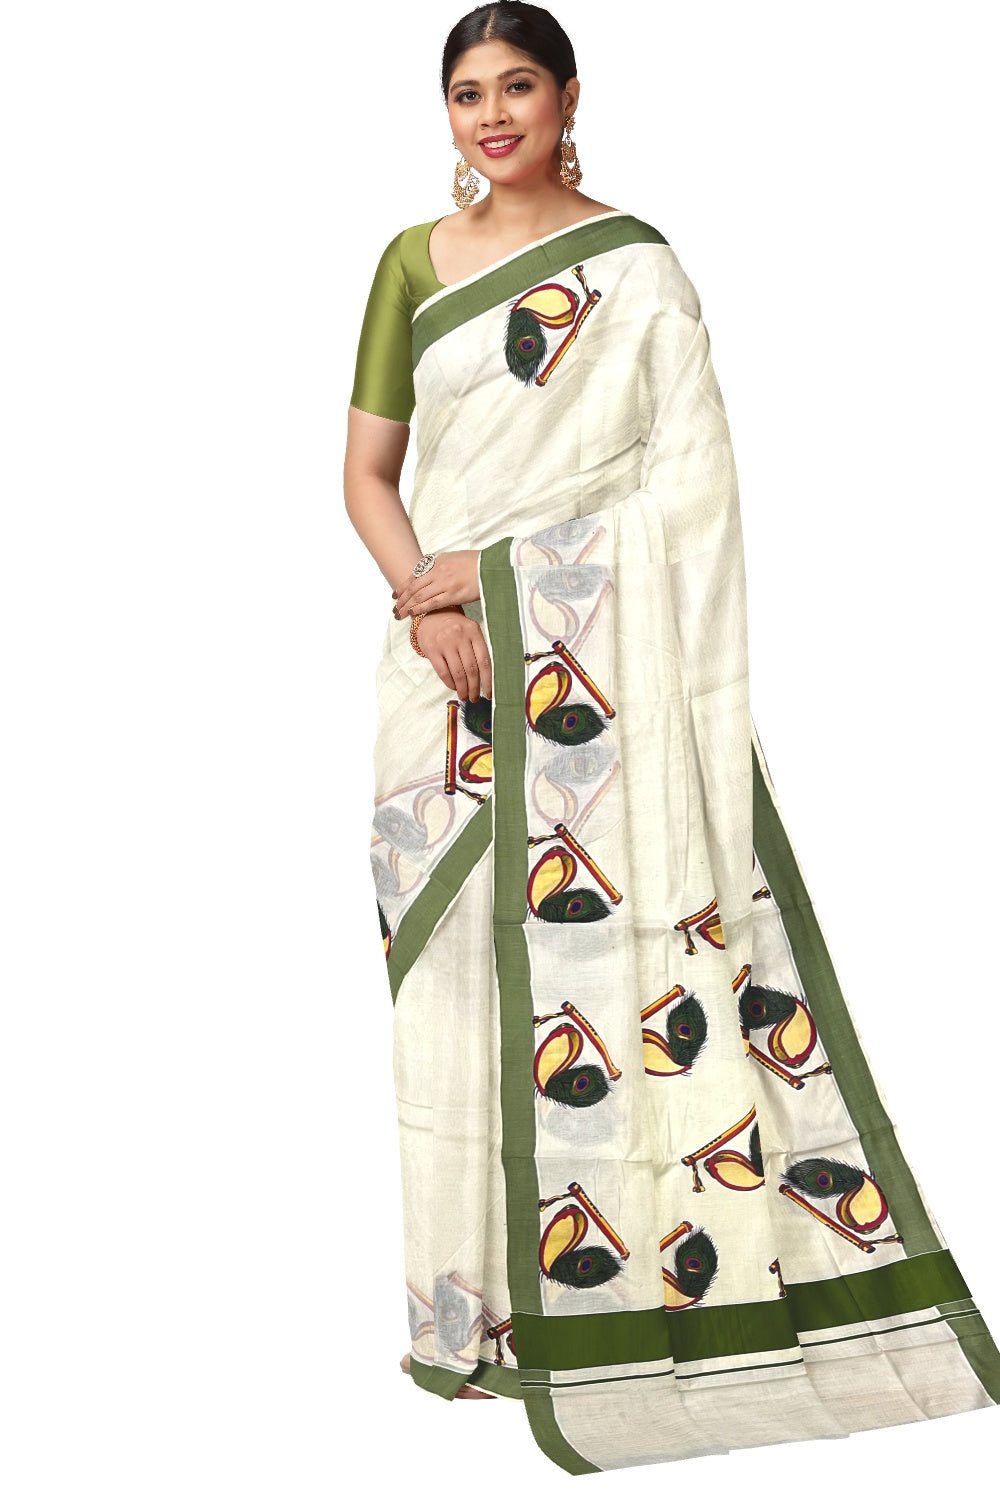 Kerala Pure Cotton Green Border Saree with Feather and Shell Mural ...